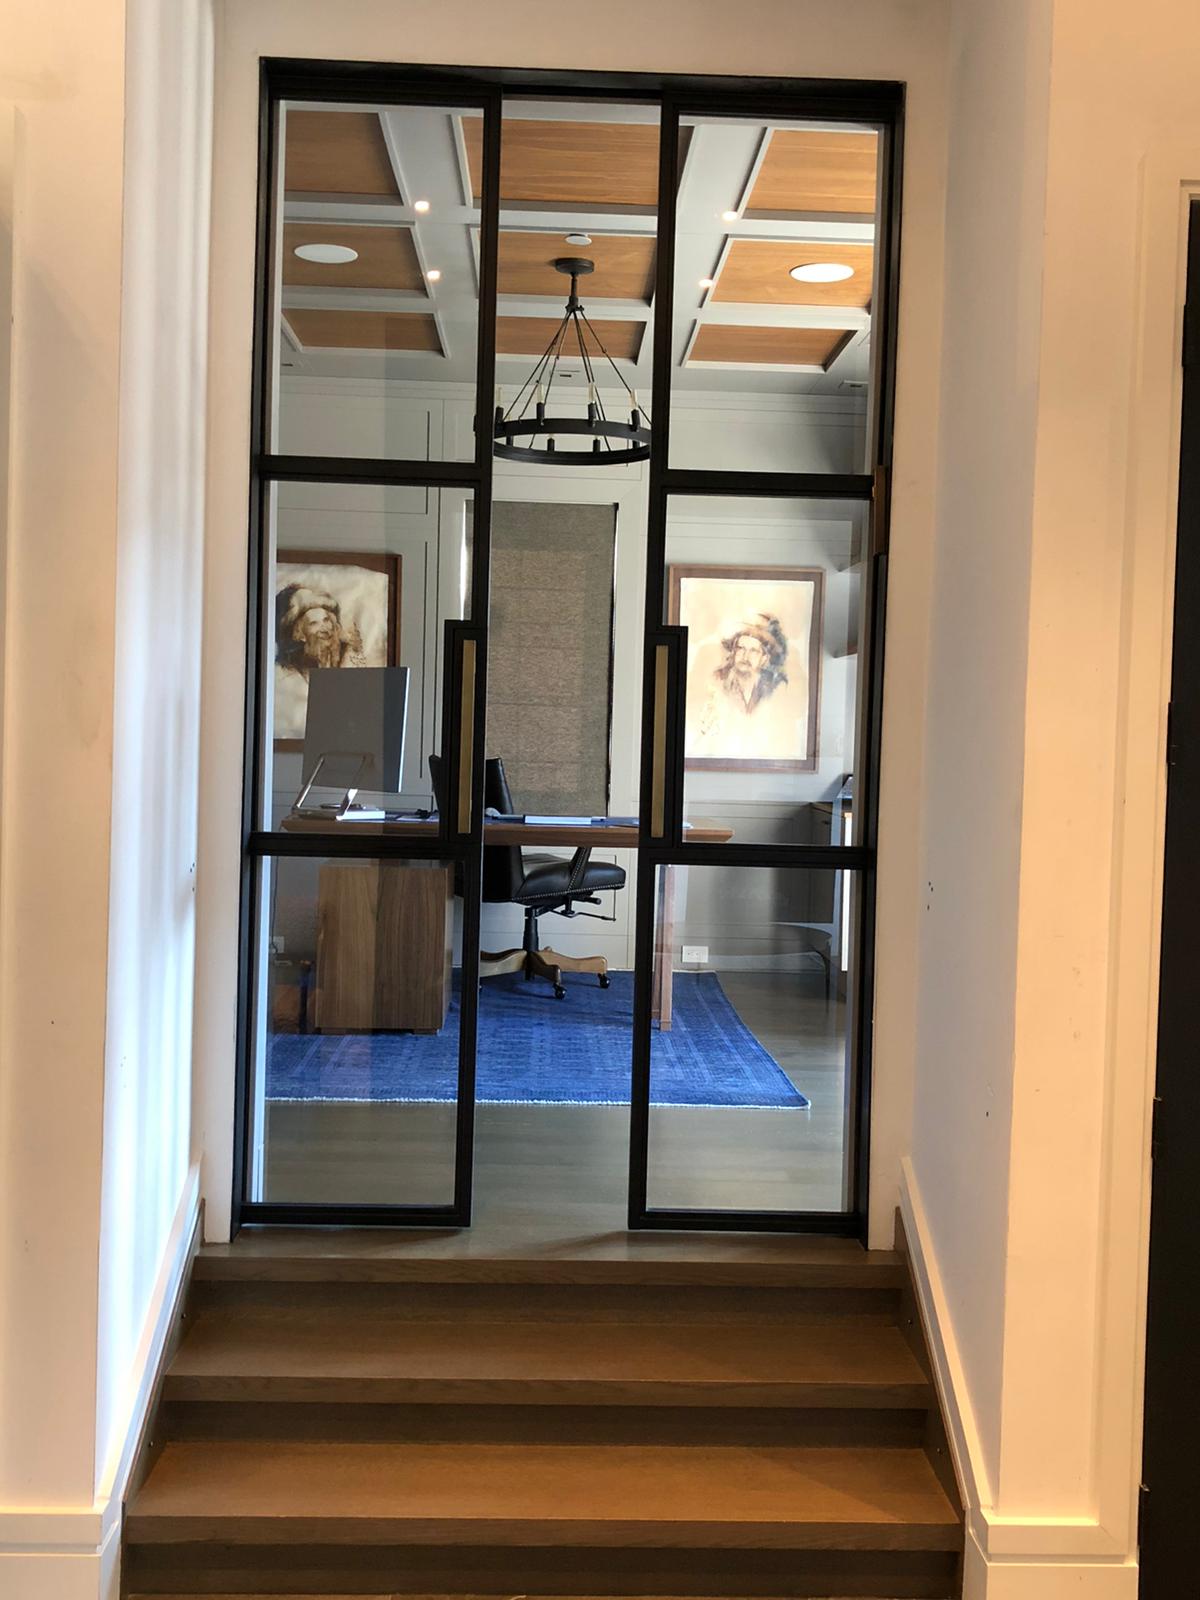 HMH Architectural Metal and Glass - Metal framed french doors